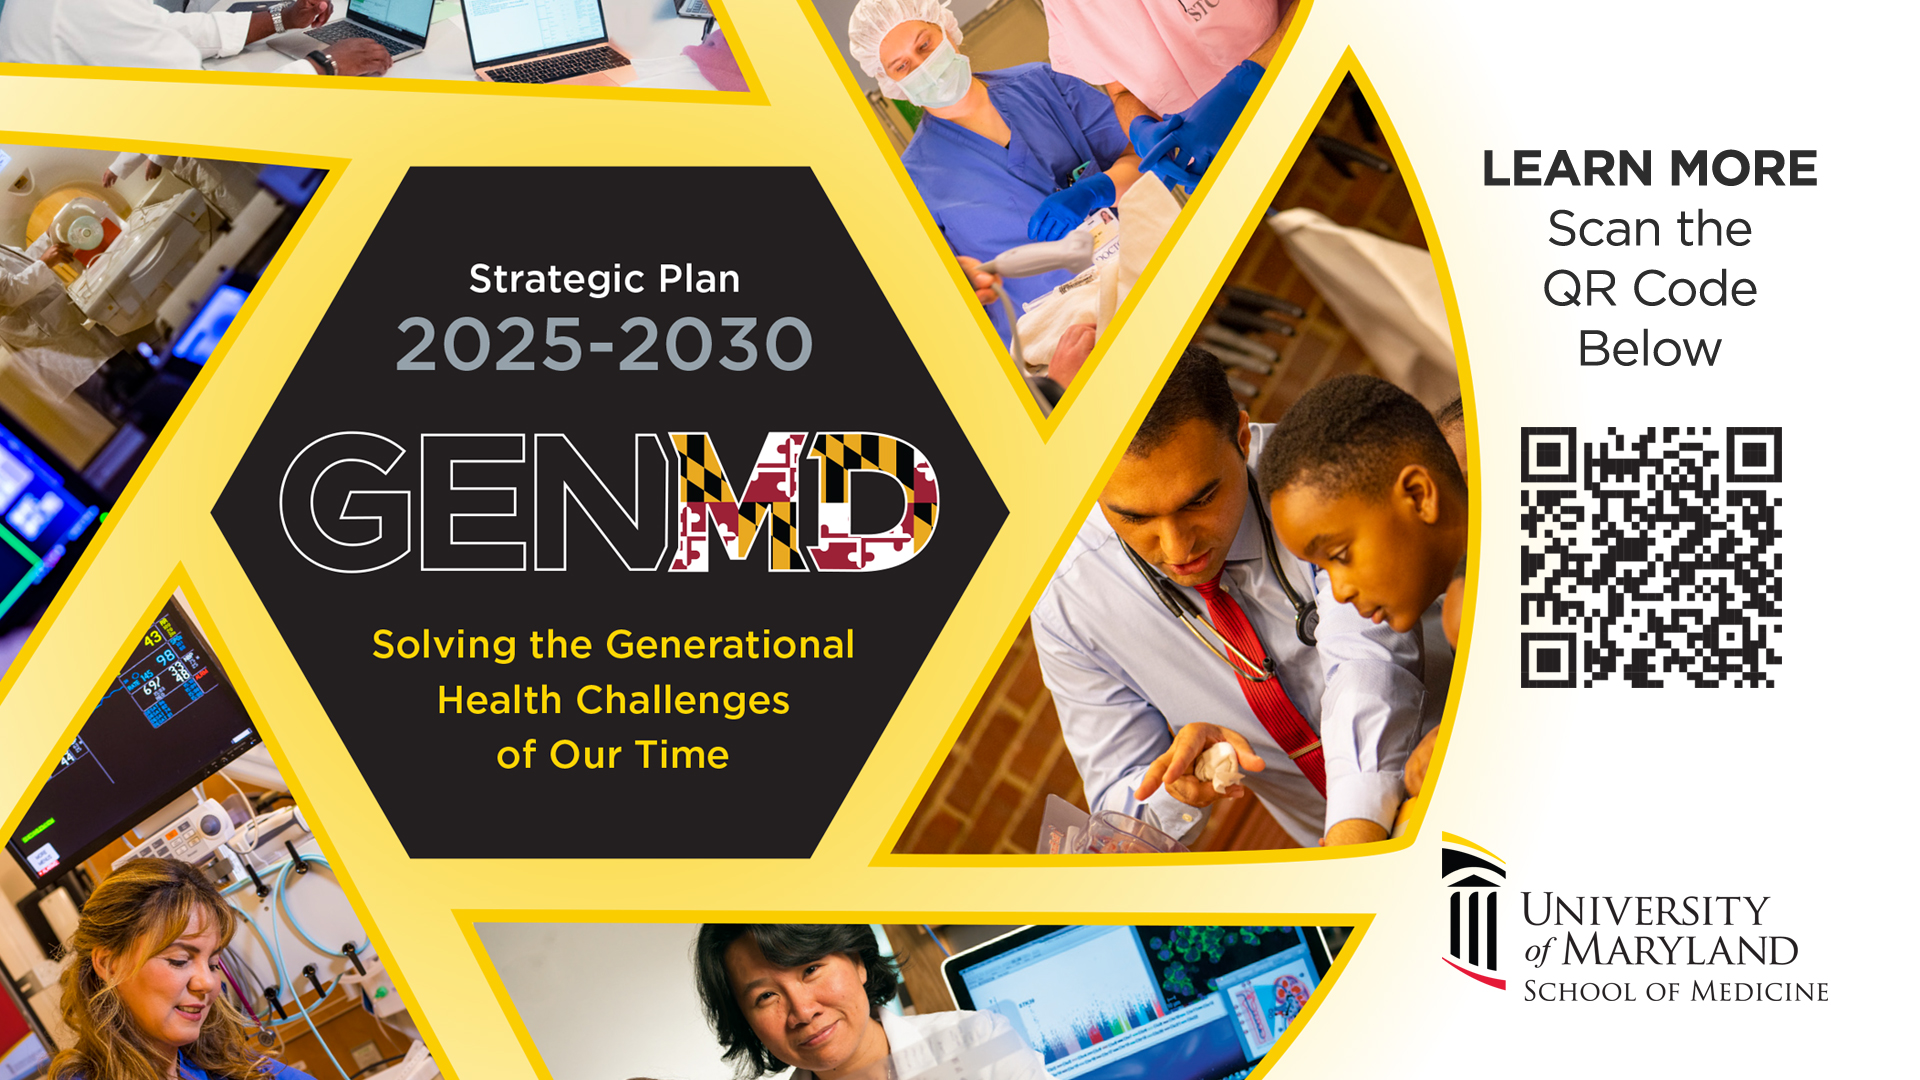 Strategic plan 2025-2030, GenMD: Solving the Generational Health Challenges of Our Time